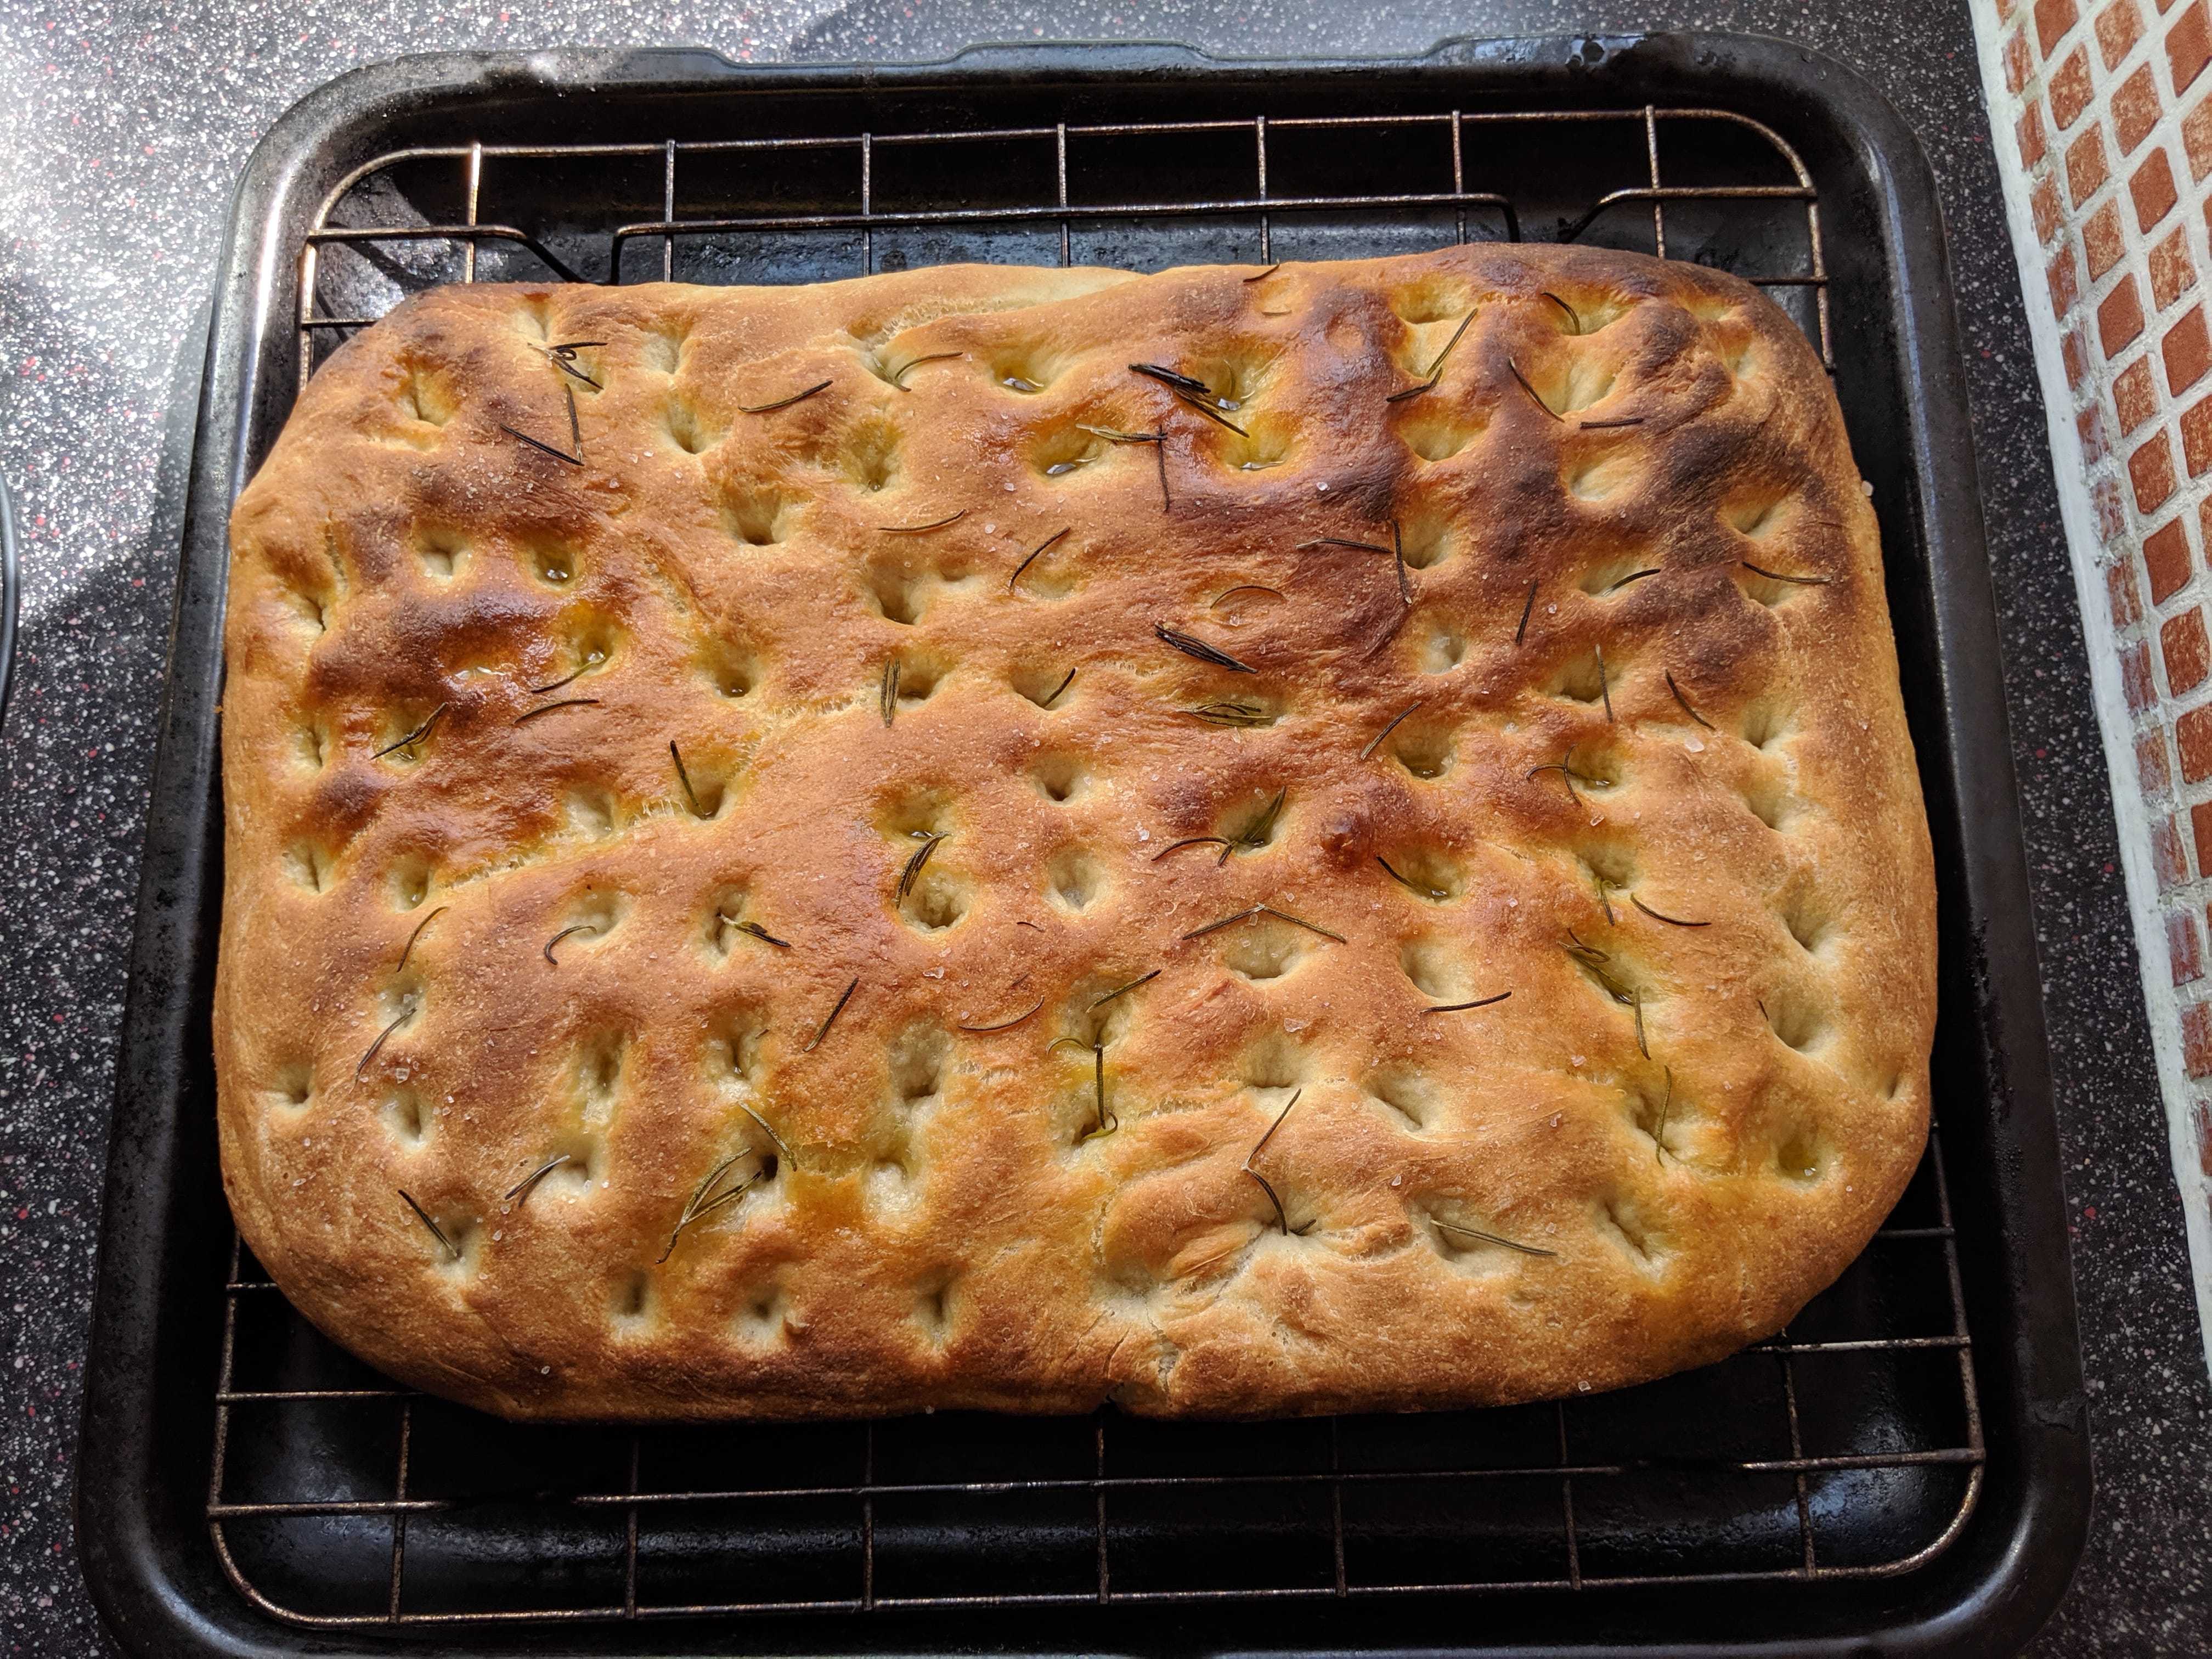 An image of a bread called “Quick Focaccia”